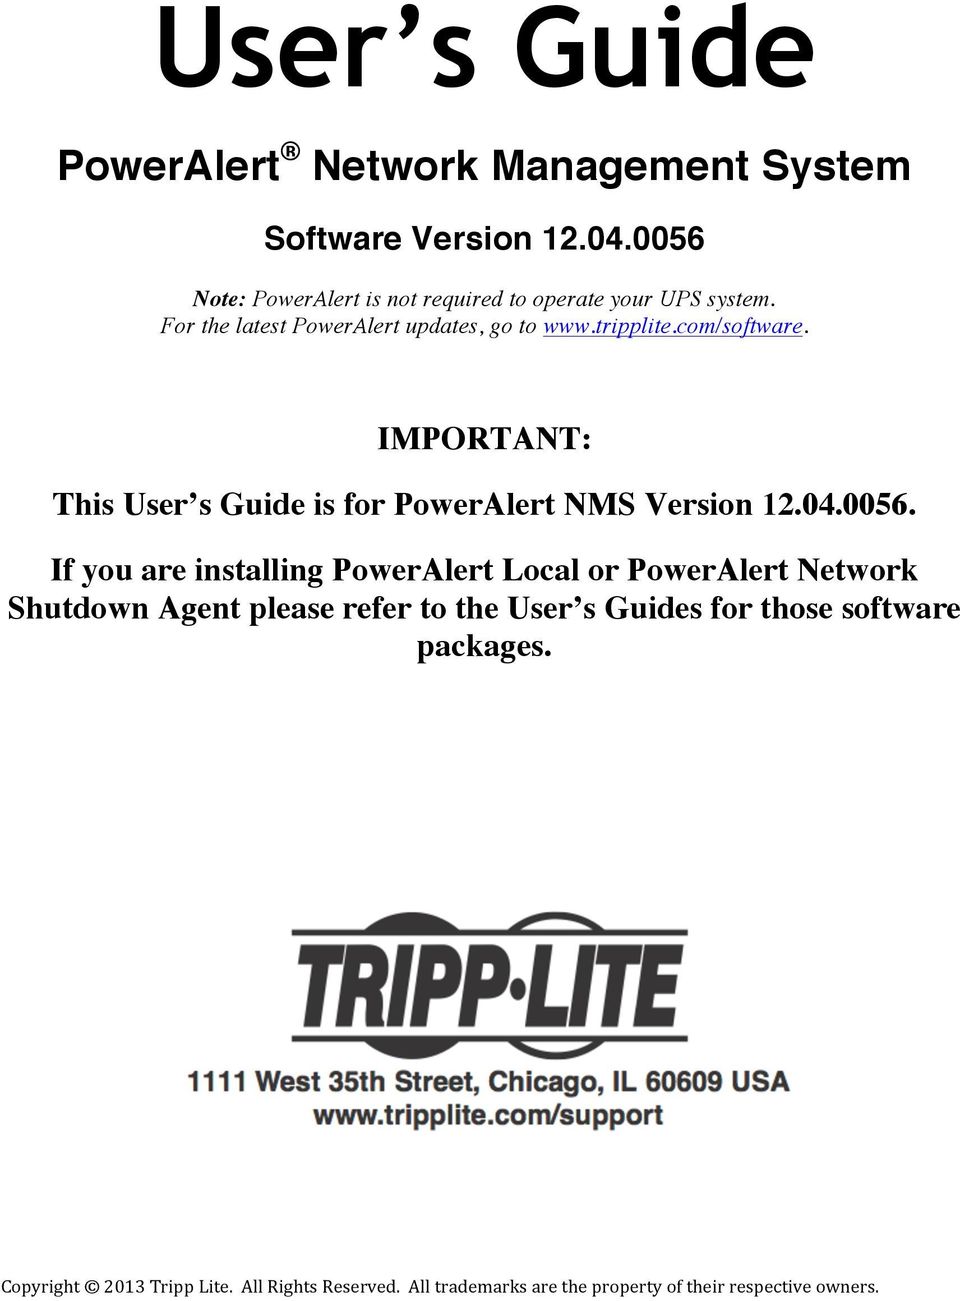 For the latest PowerAlert updates, go to www.tripplite.com/software.